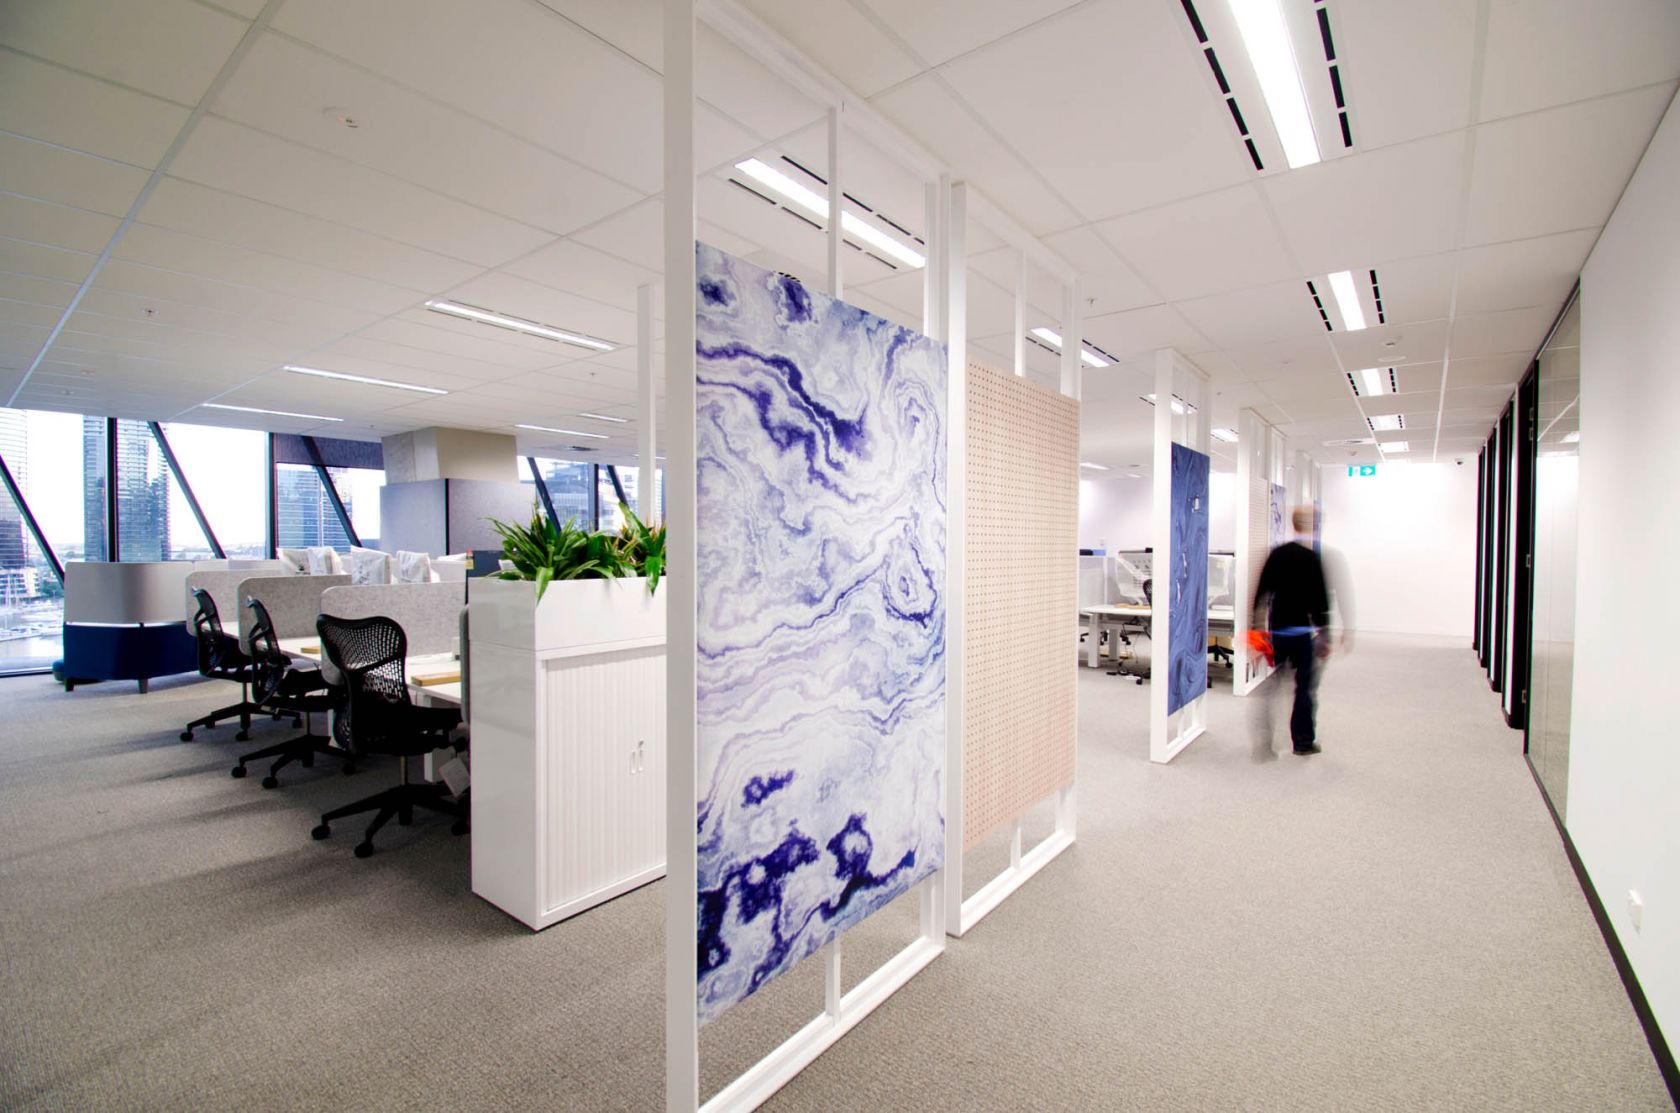 727 Collins St office workstations and blue pattern partitions